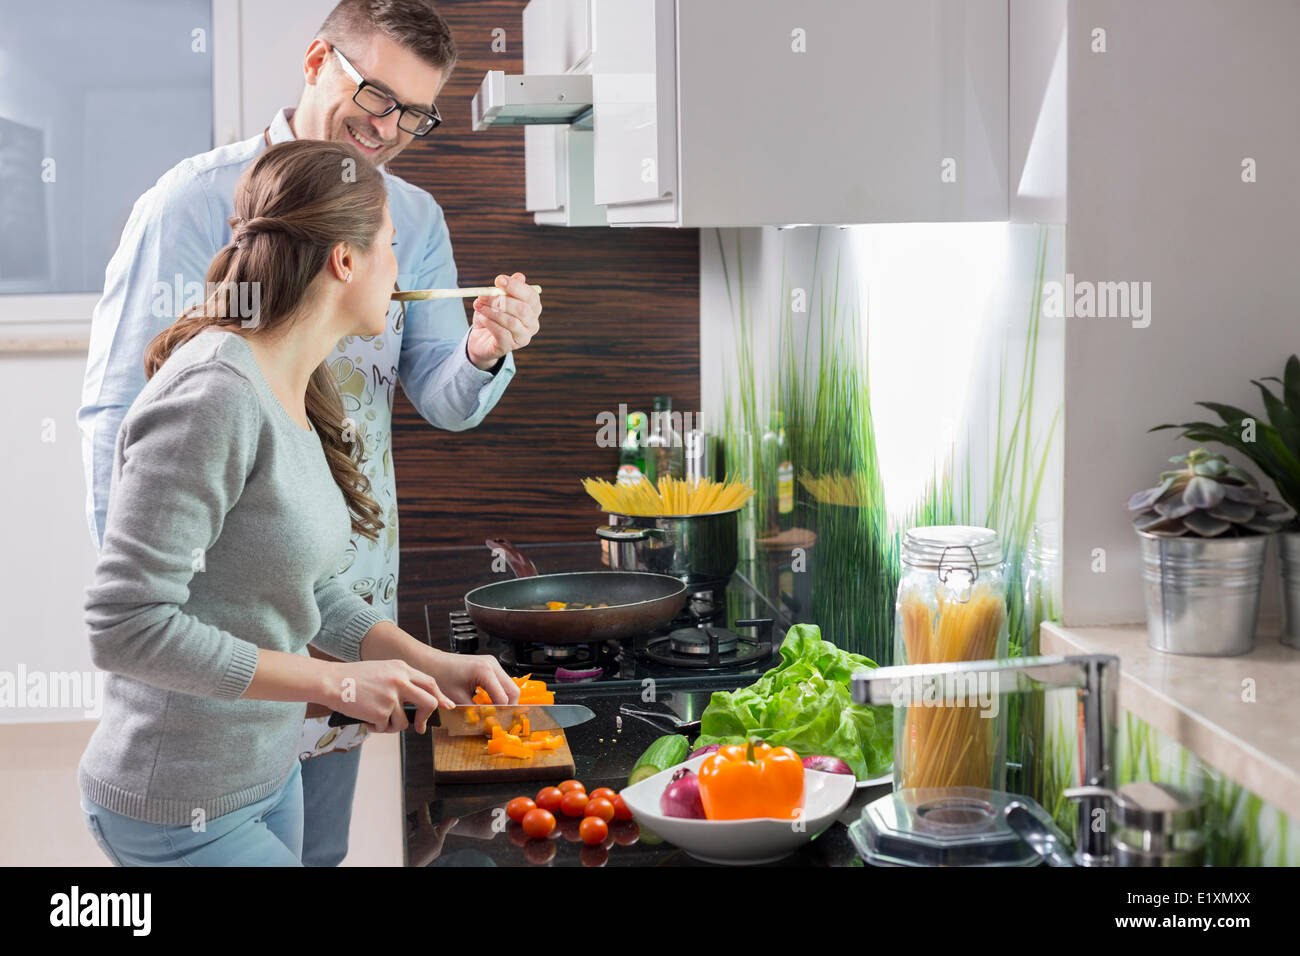 Happy man feeding food to woman cutting vegetables in kitchen Stock Photo